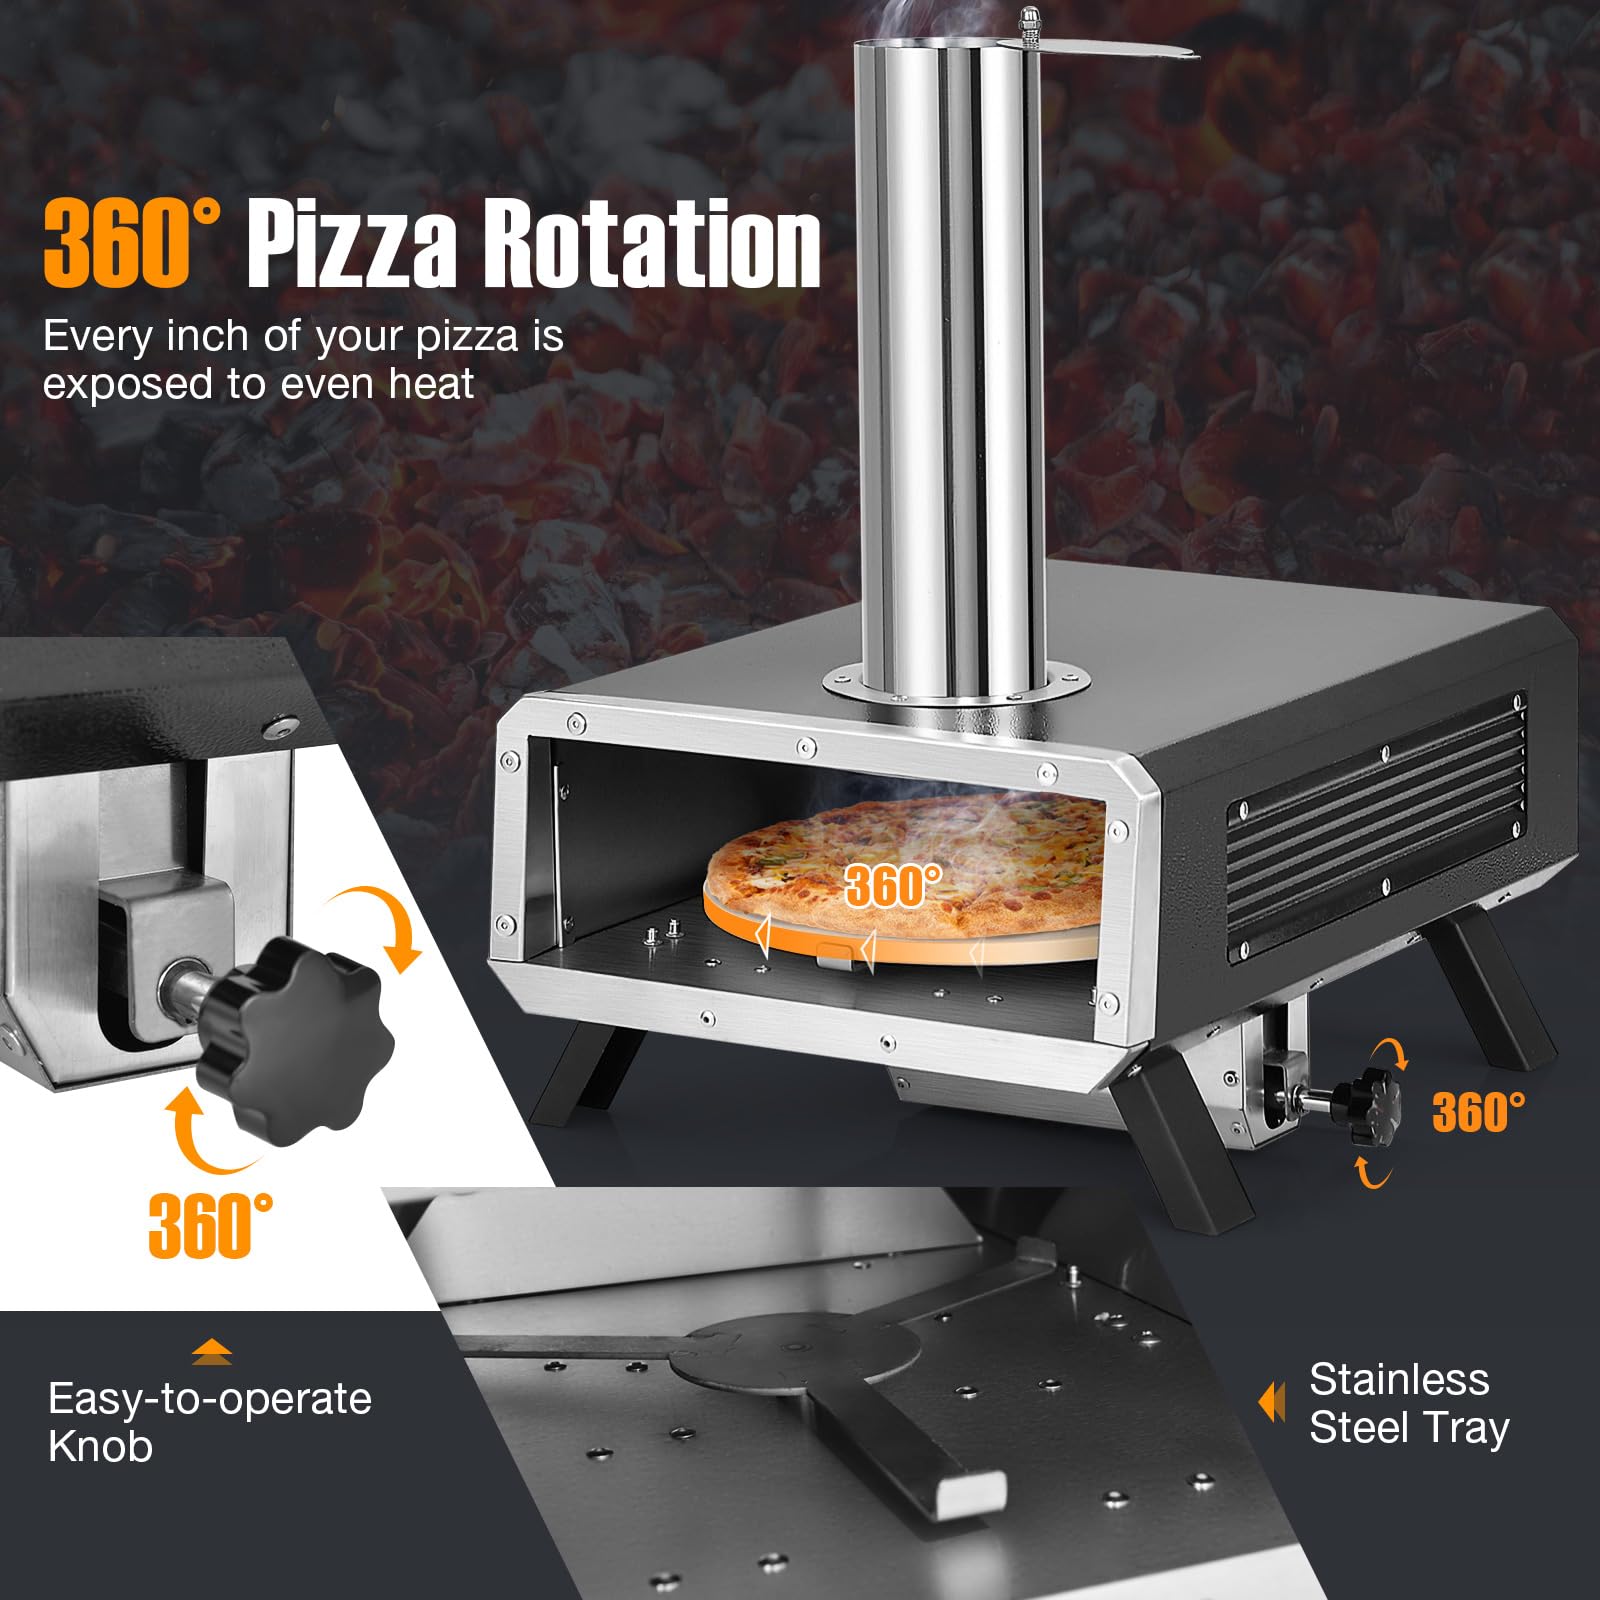 Giantex Pizza Oven Outdoor - 360° Rotating Pizza Stone